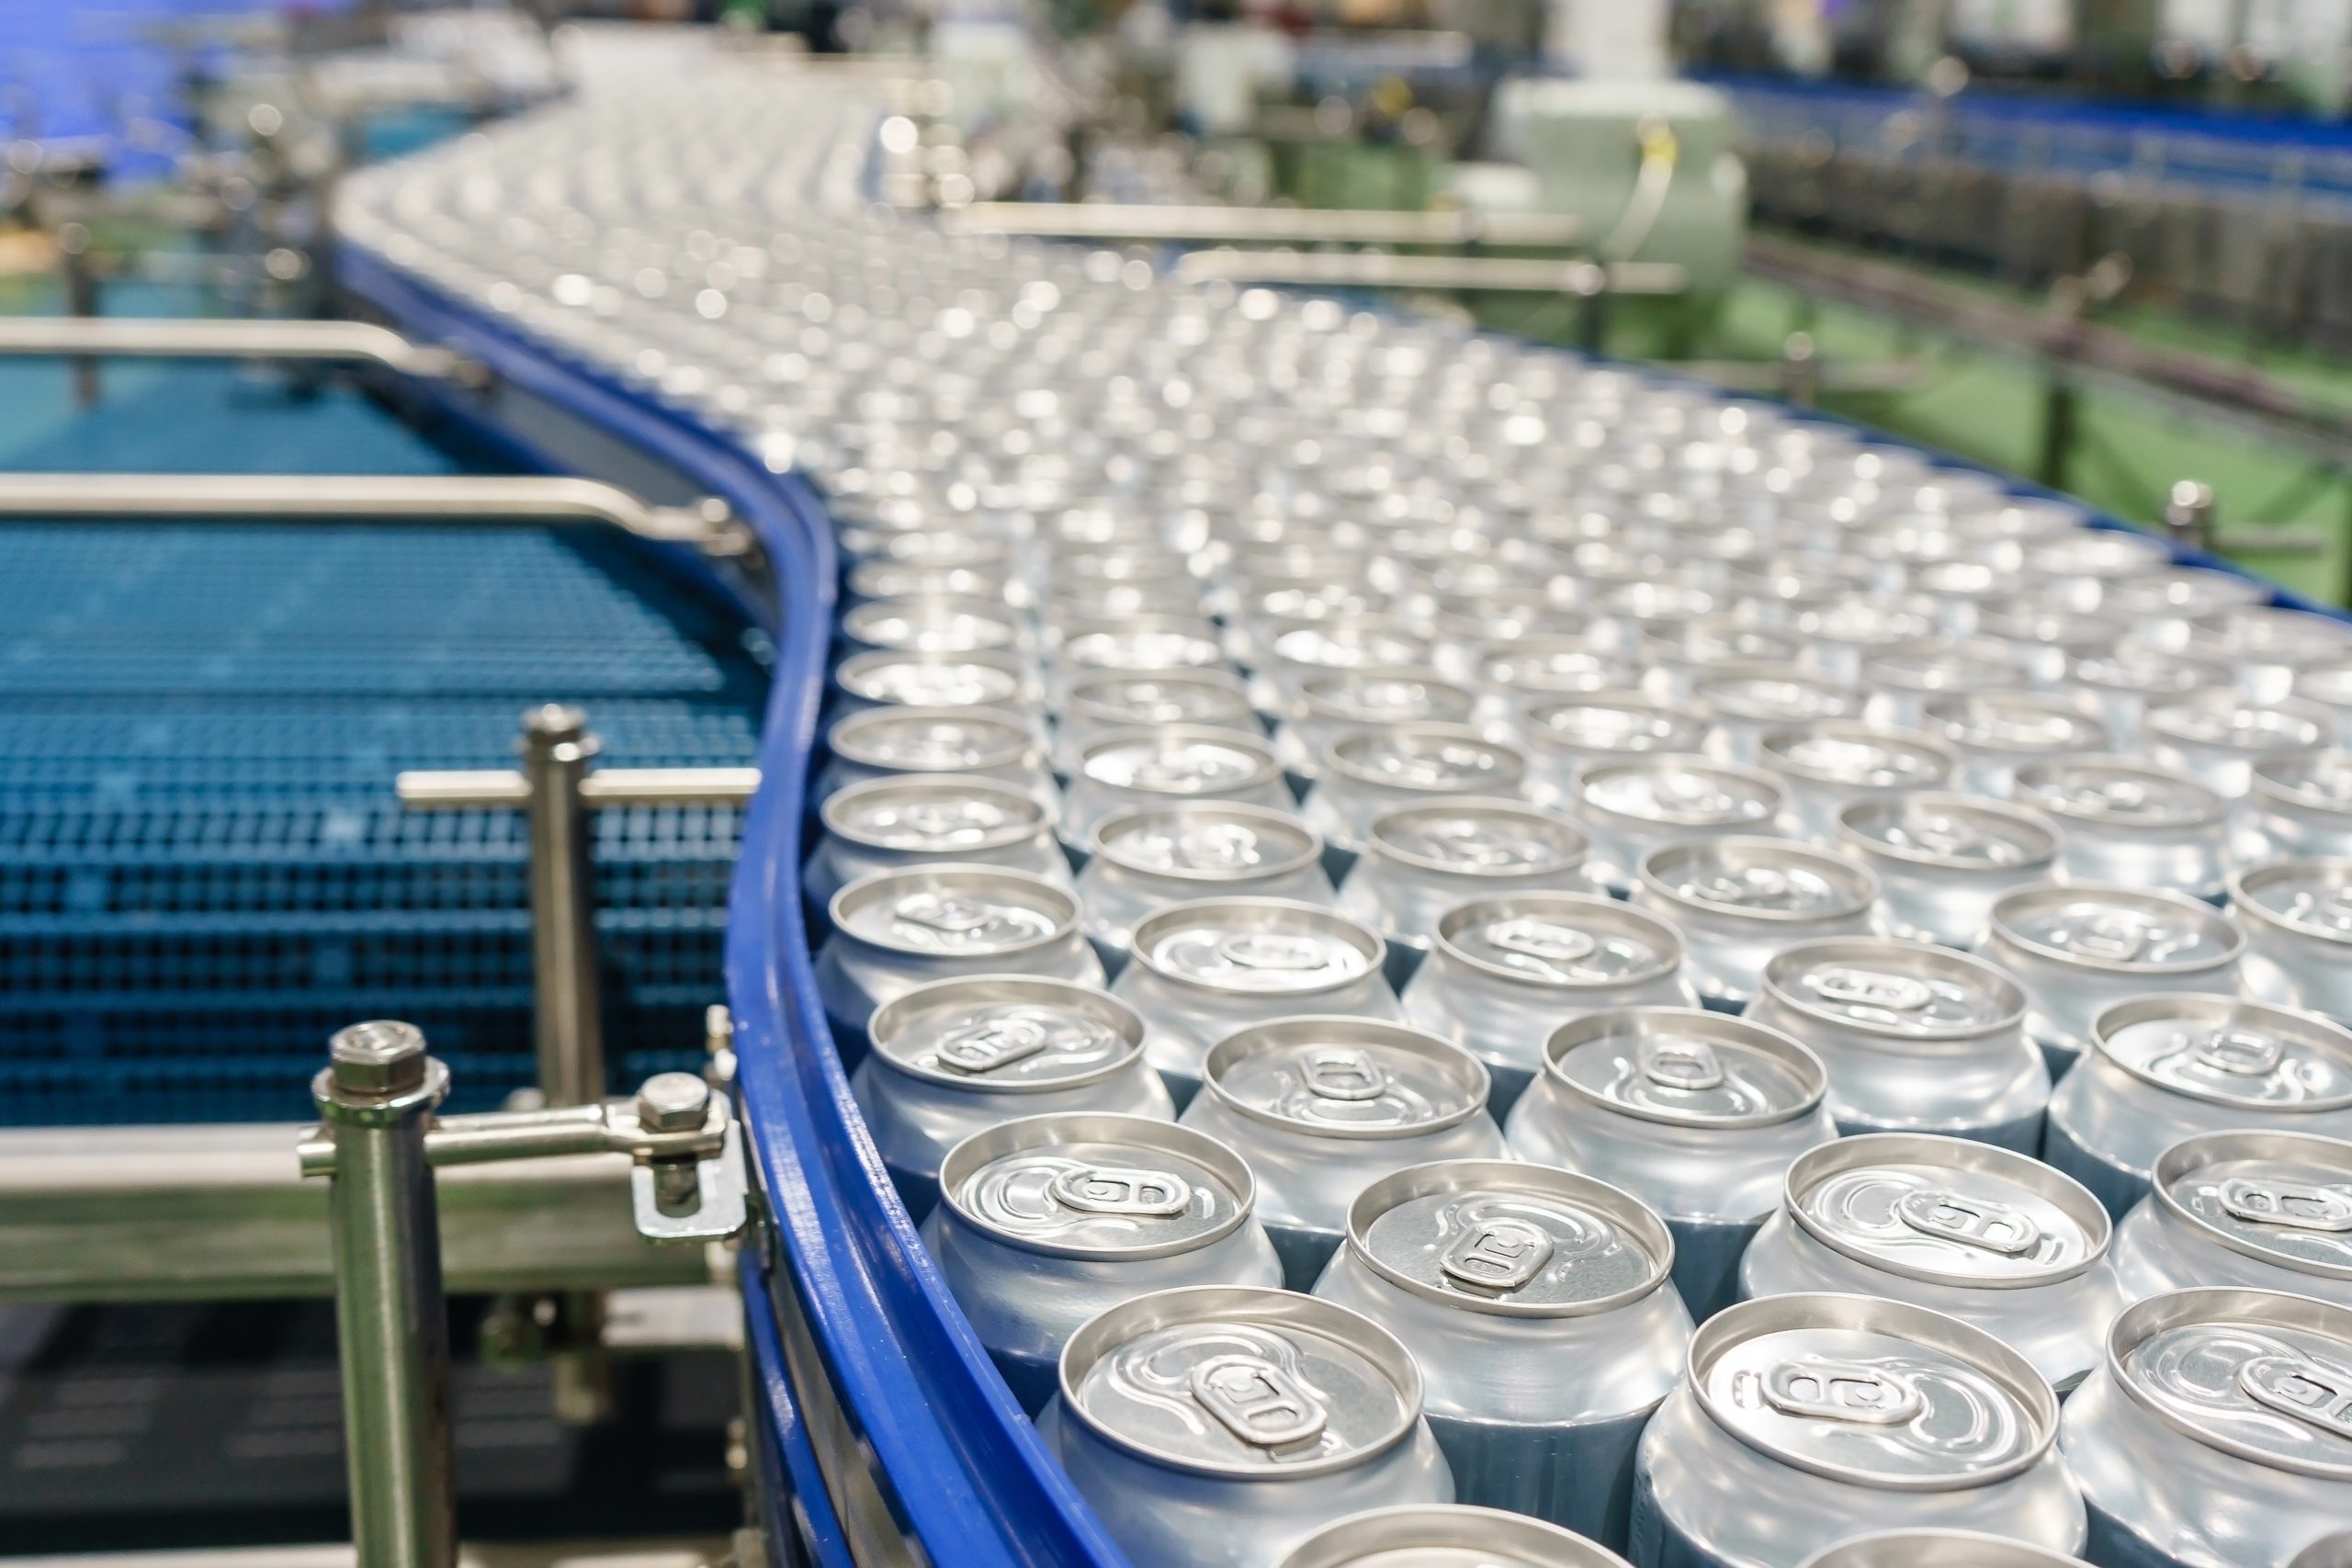 Plans for 160 jobs at new £150m drinks can plant